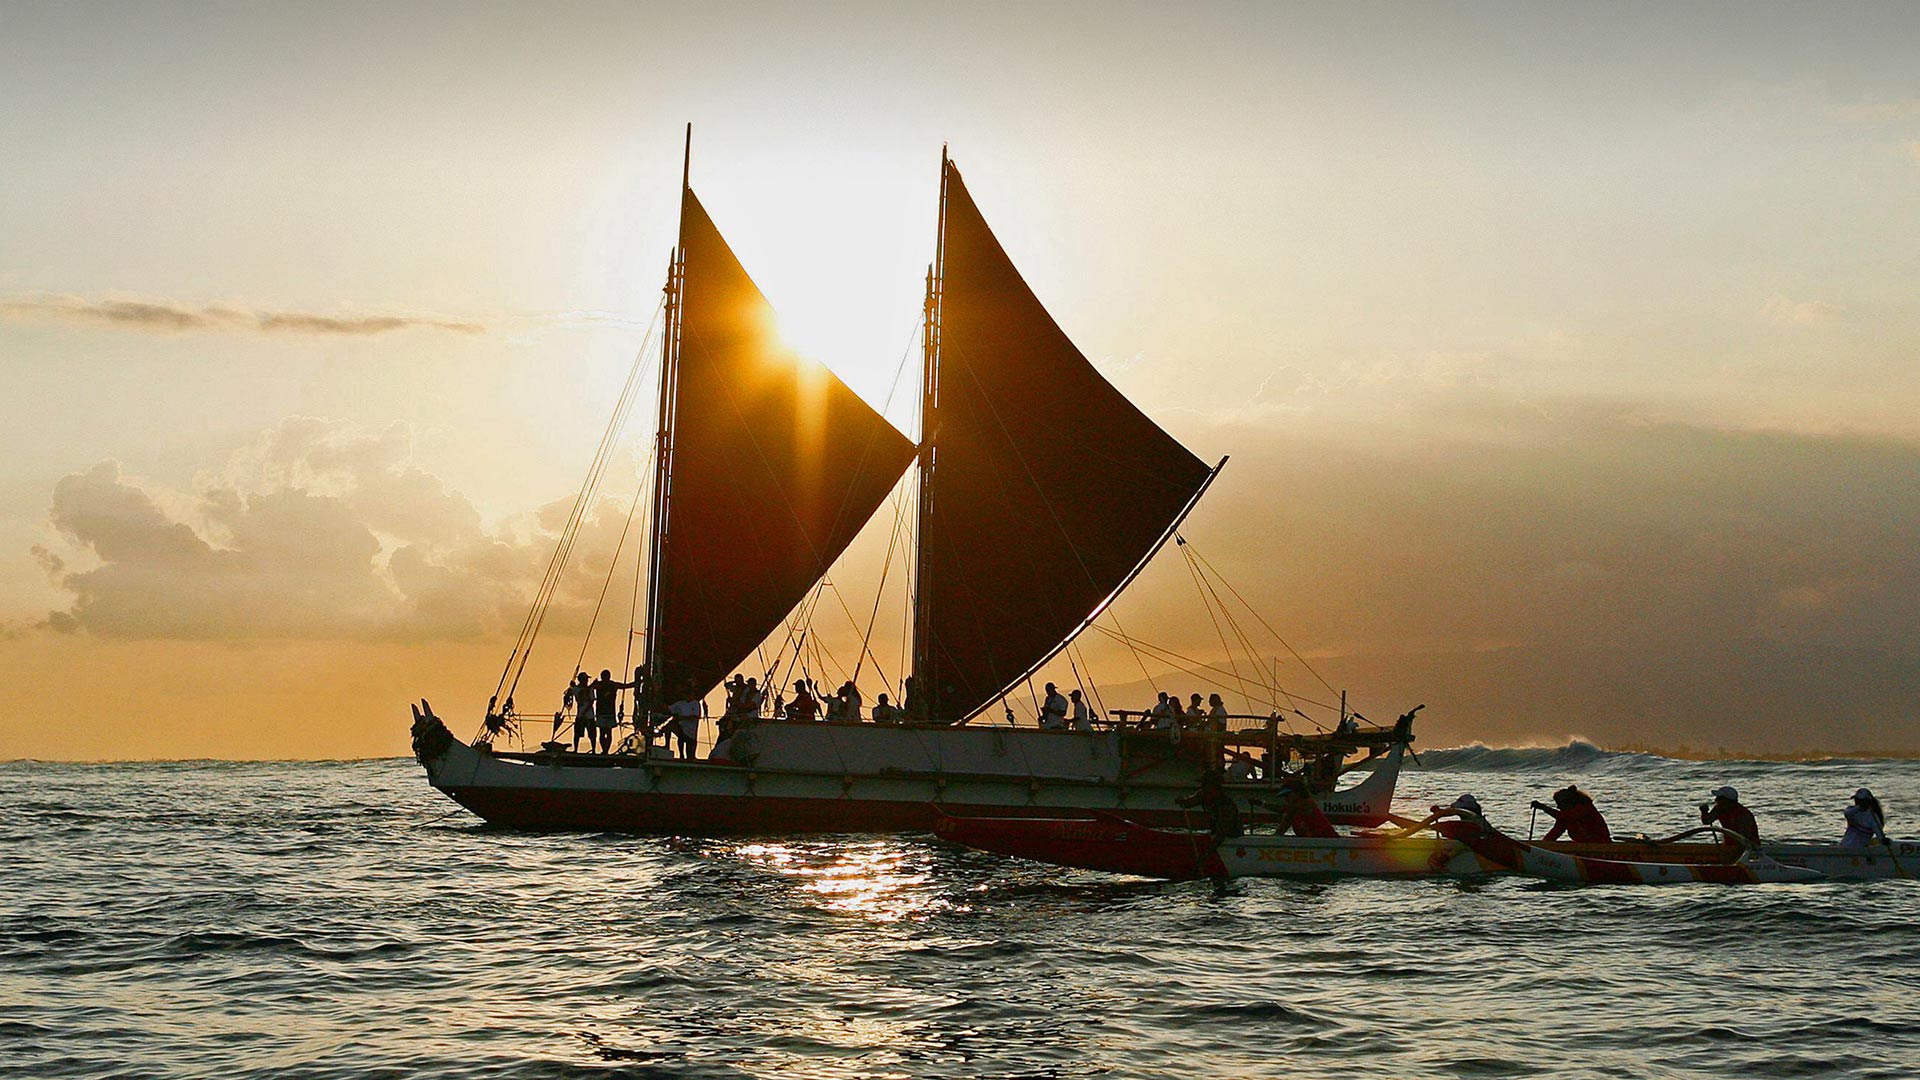 The Hōkūle'a, a traditional Hawaiian voyaging canoe, departs for a 3-year voyage from Honolulu, Hawaii, on May 17, 2014 - Reuters/Alamy)